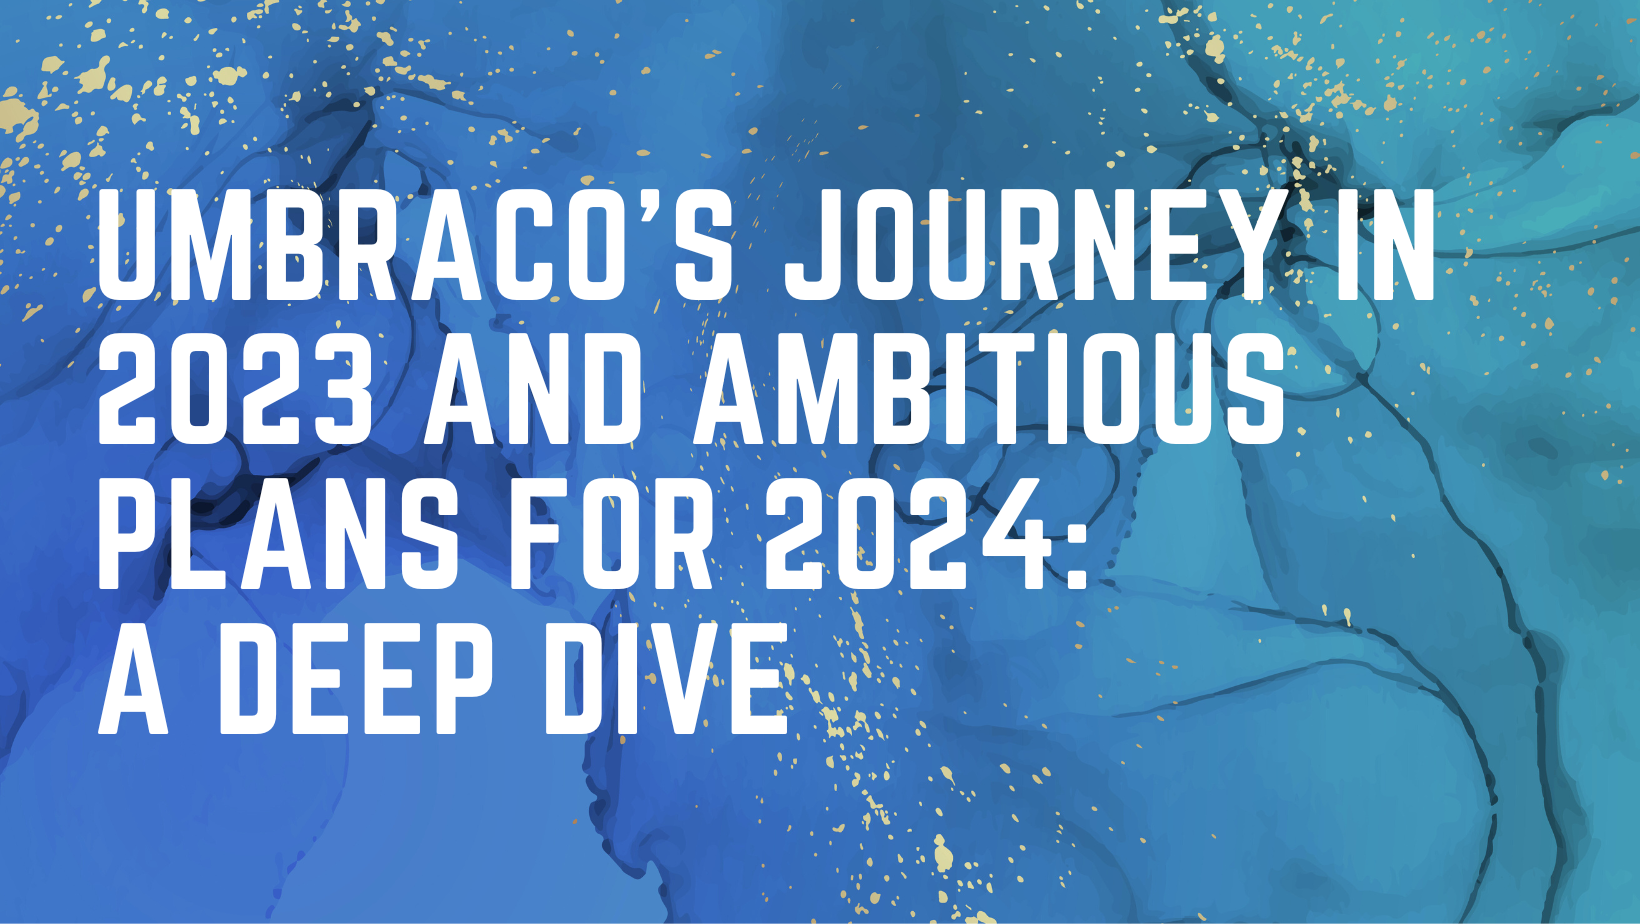 Umbraco's Journey in 2023 and Ambitious Plans for 2024: A Deep Dive